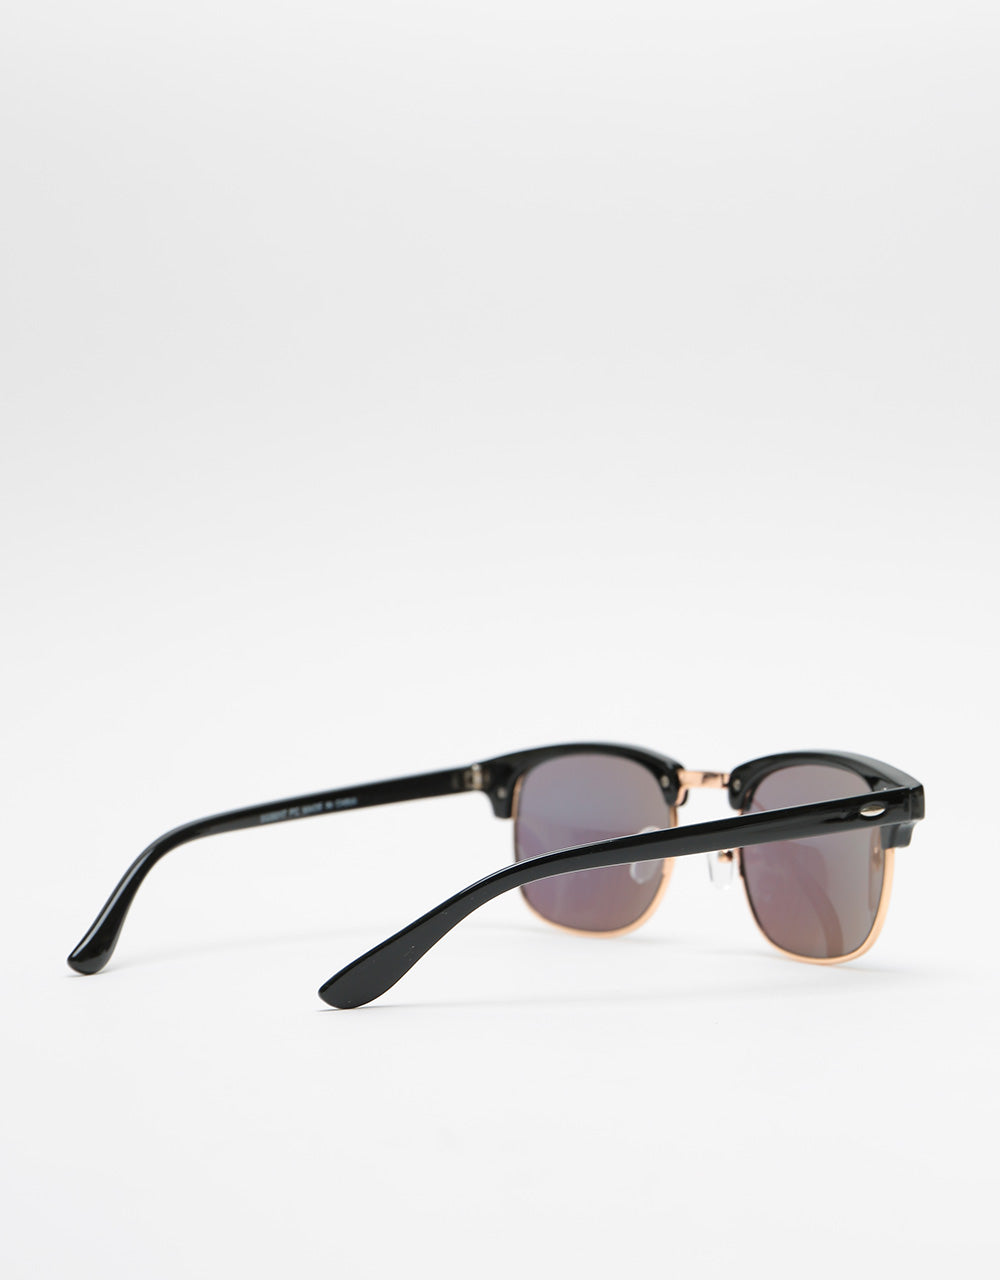 Route One New Clubmaster Sunglasses - Black Green Mirrored Lens